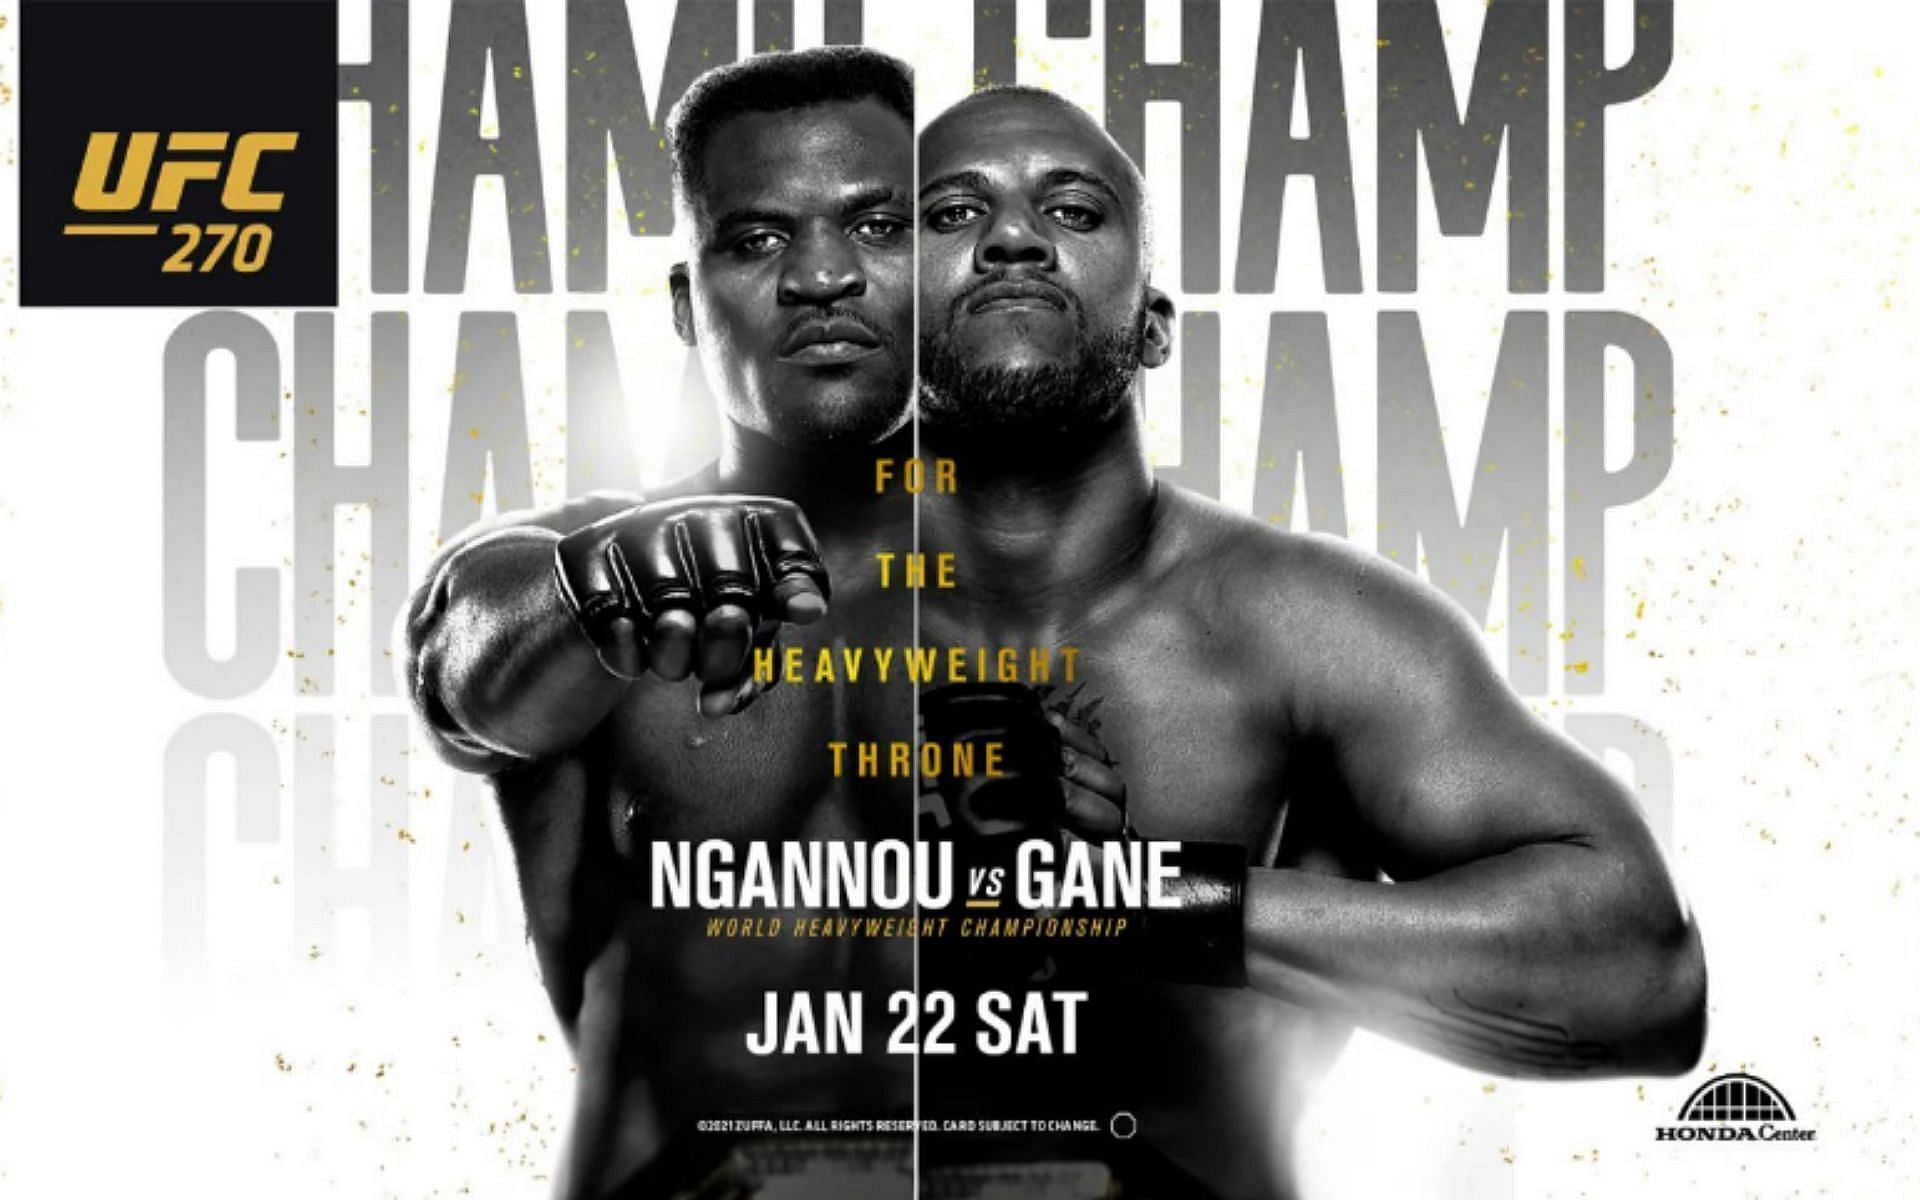 Francis Ngannou and Ciryl Gane are set to fight for the undisputed heavyweight title this weekend